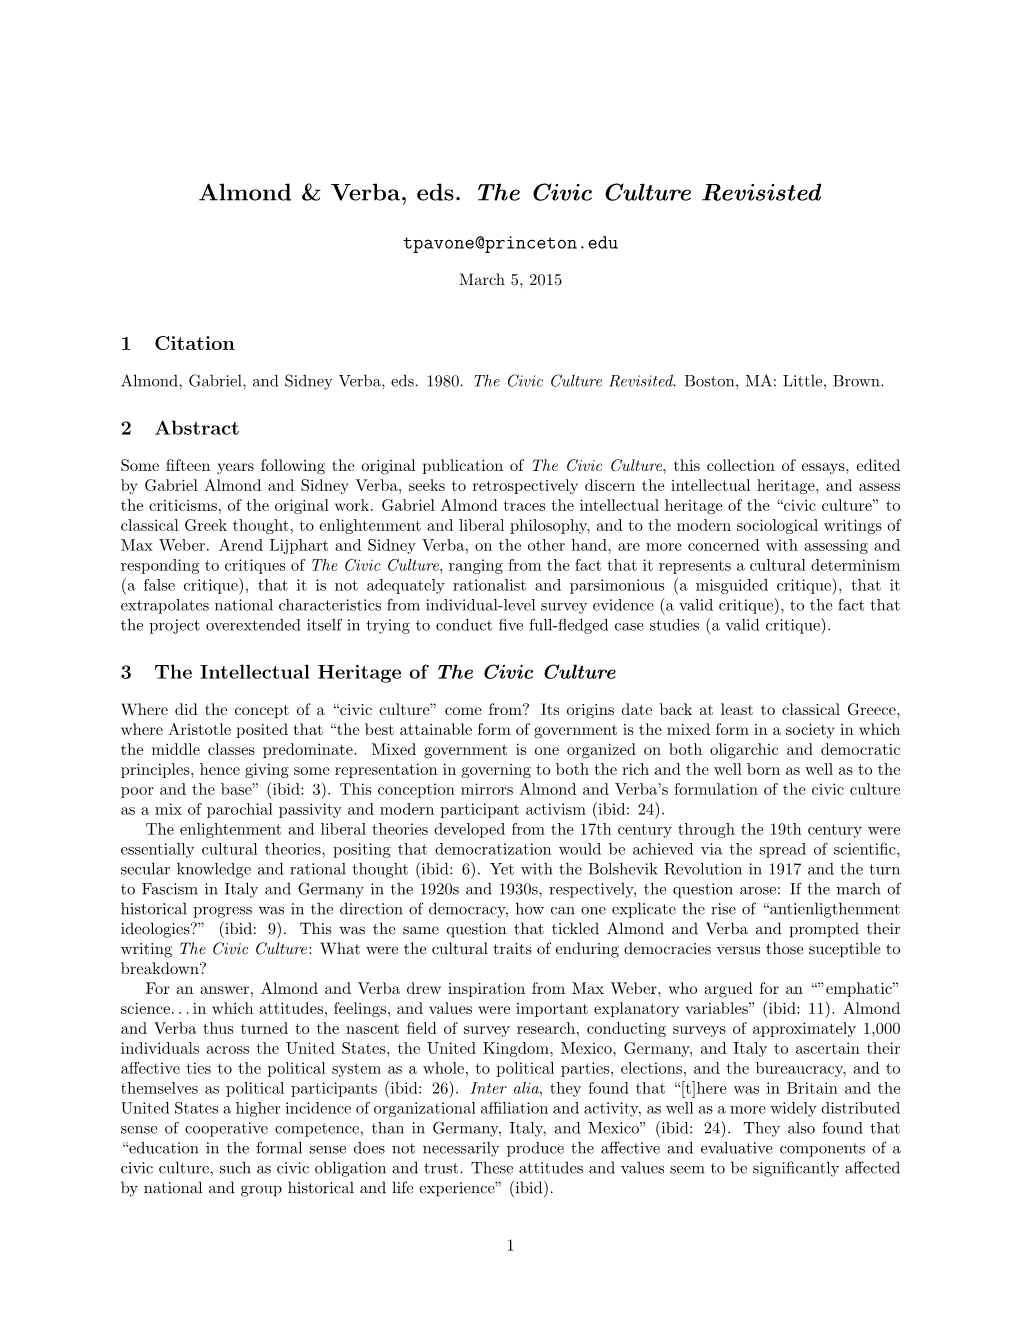 Almond and Verba-The Civic Culture Revisited